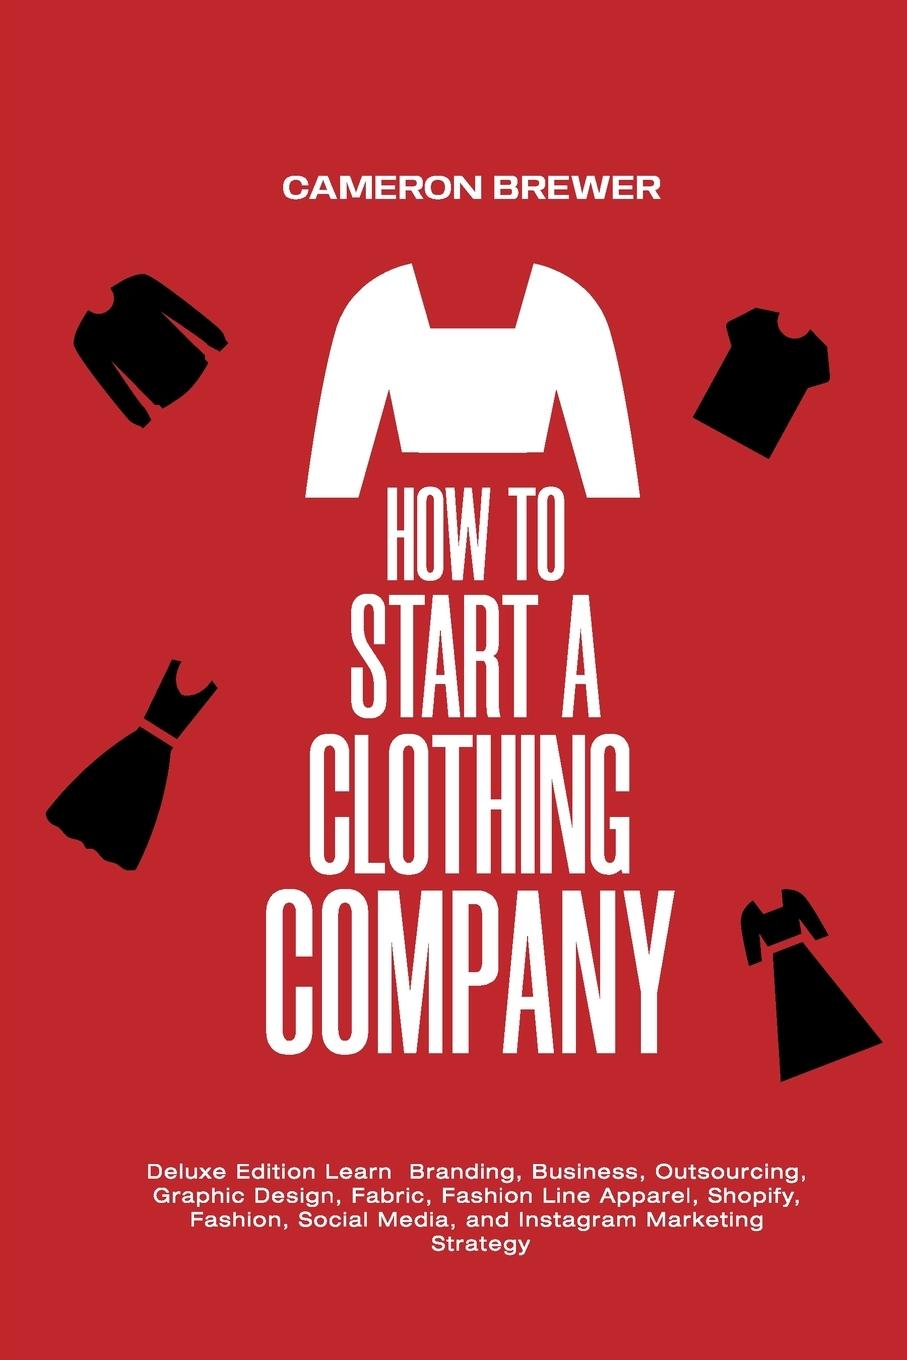 Book How to Start a Clothing Company - Deluxe Edition Learn Branding, Business, Outsourcing, Graphic Design, Fabric, Fashion Line Apparel, Shopify, Fashion CAMERON BREWER